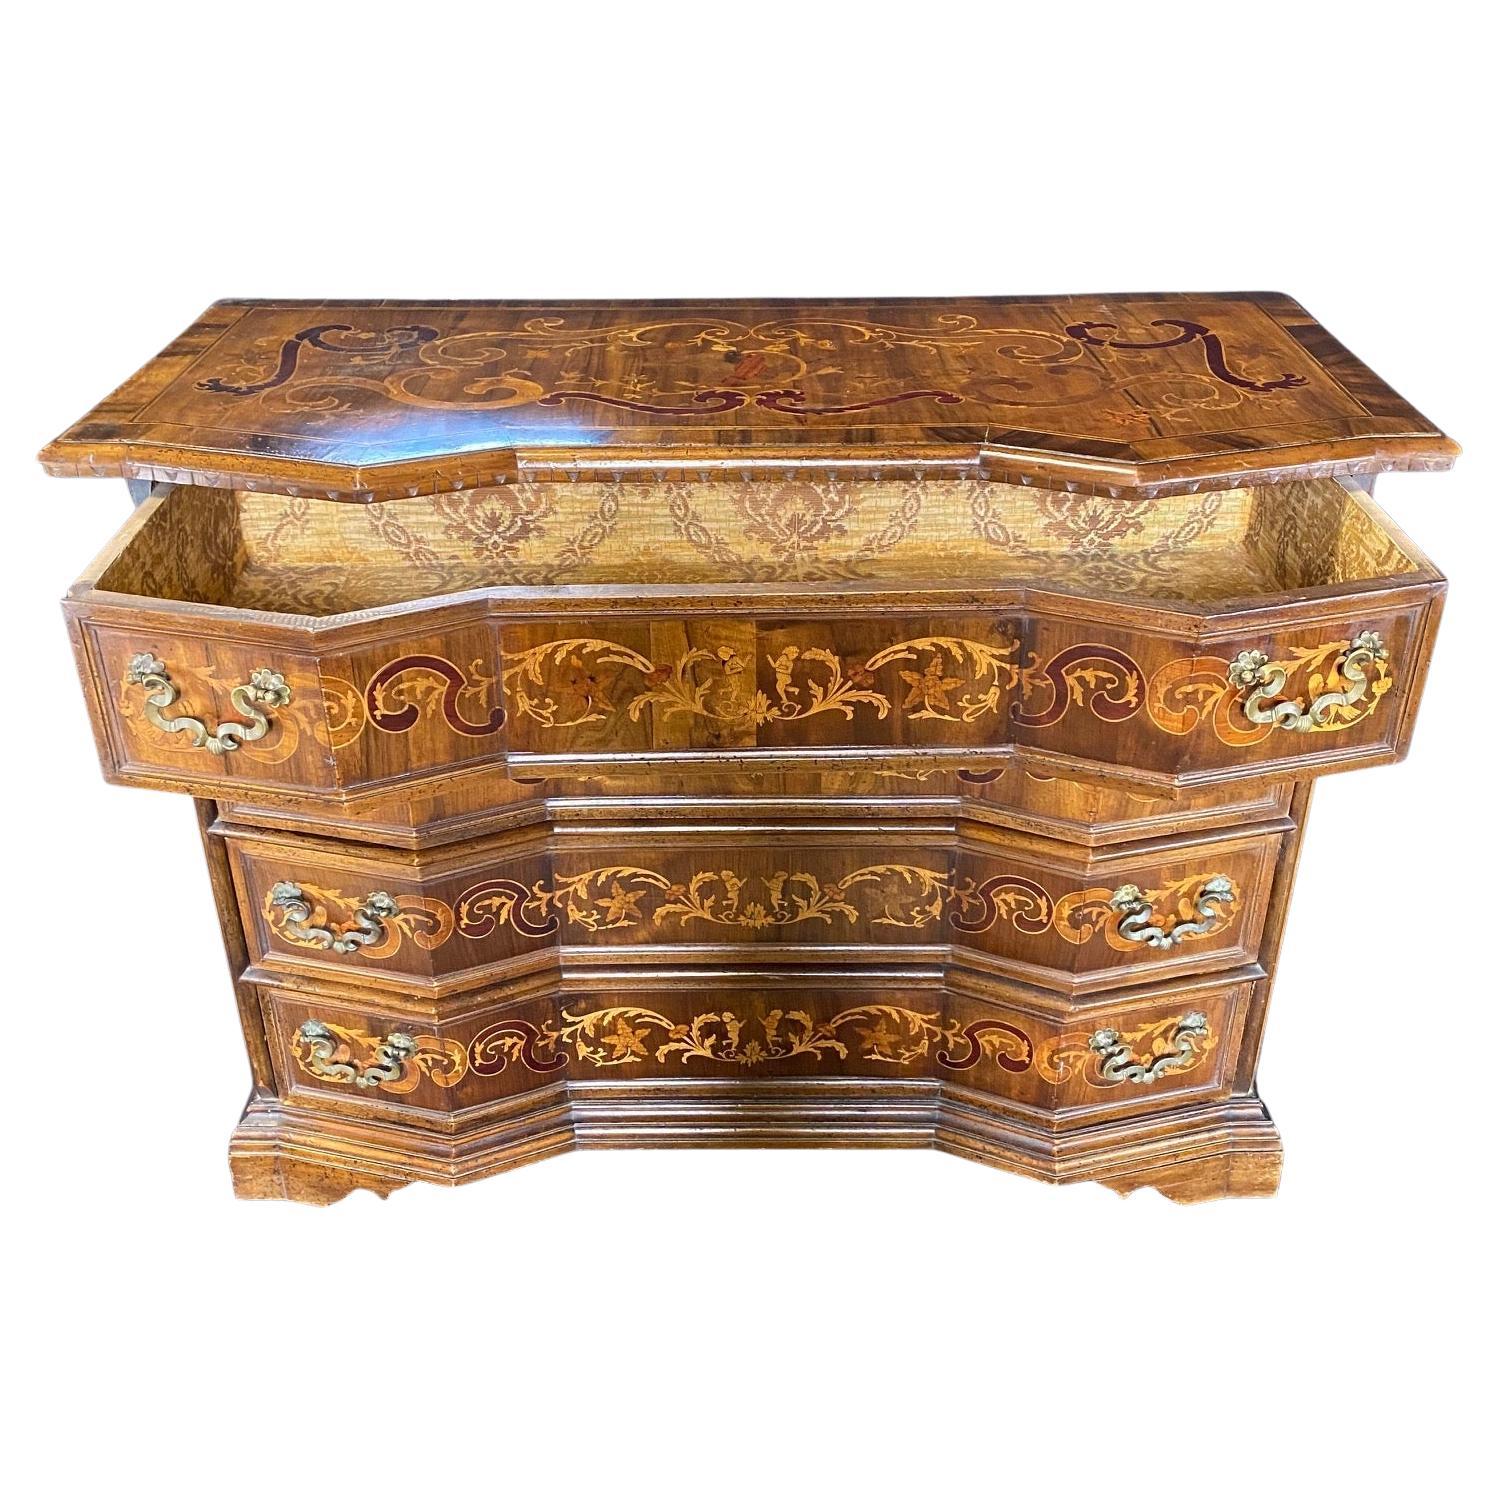 An exceptional quality antique chest of drawers finely hand crafted in Italy in the 19th century, featuring an intricately inlaid top, drawers and sides with birds and dancing figures beautifully framed with leaves and garlands. Lovely serpentine